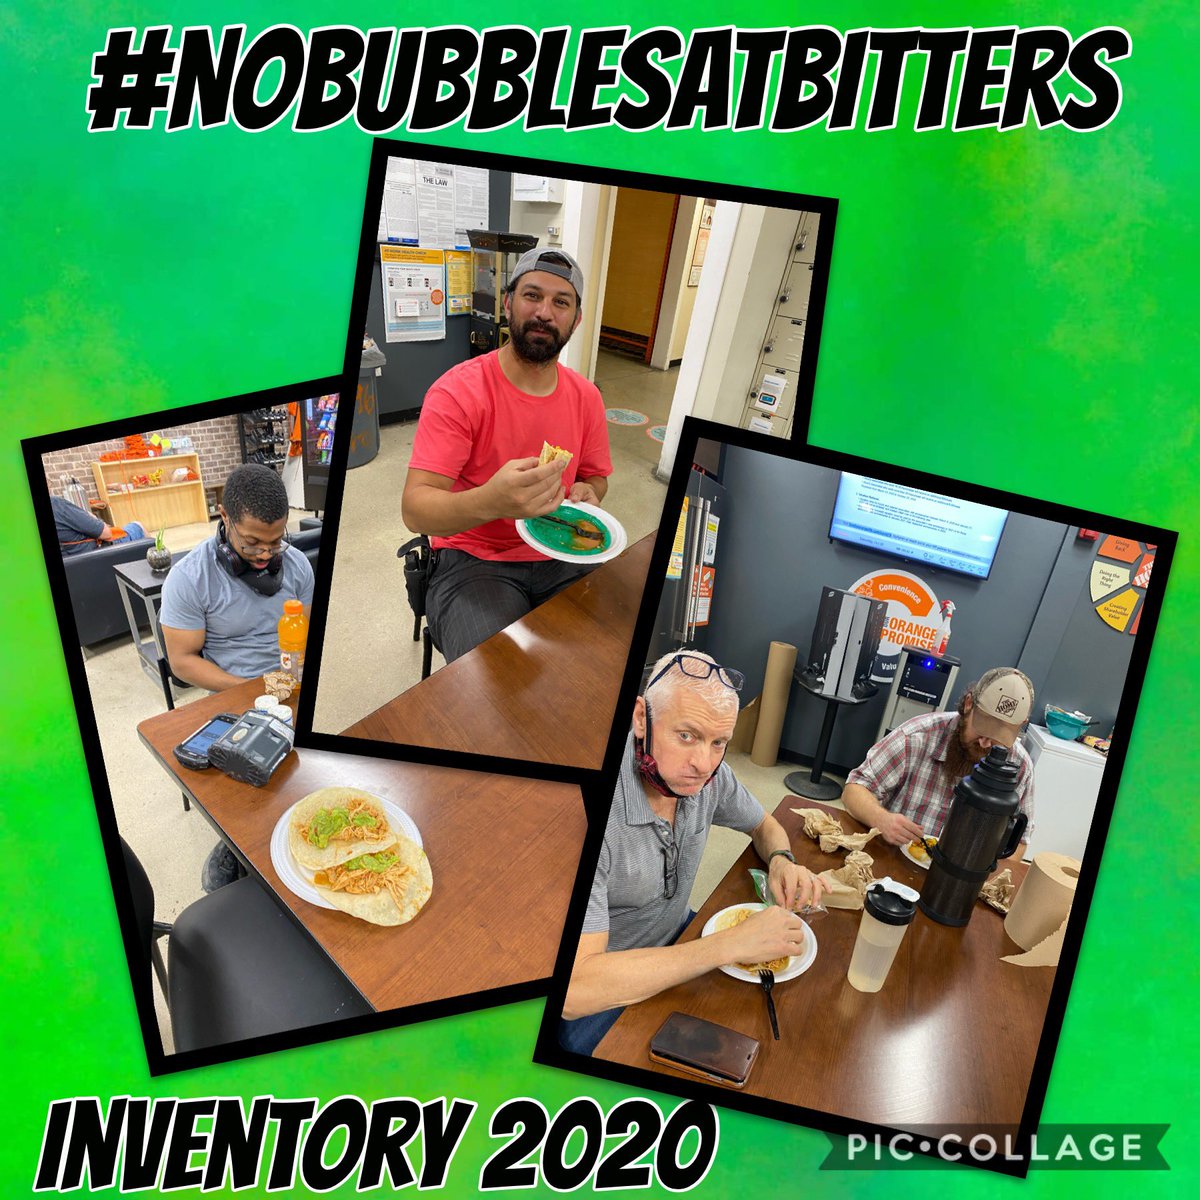 Inventory Prep Week lunch for the crew and our family on the freight team!!! Let’s get this!!! Driving for success!!! #InventoryPrep #NoBubblesAtBitters